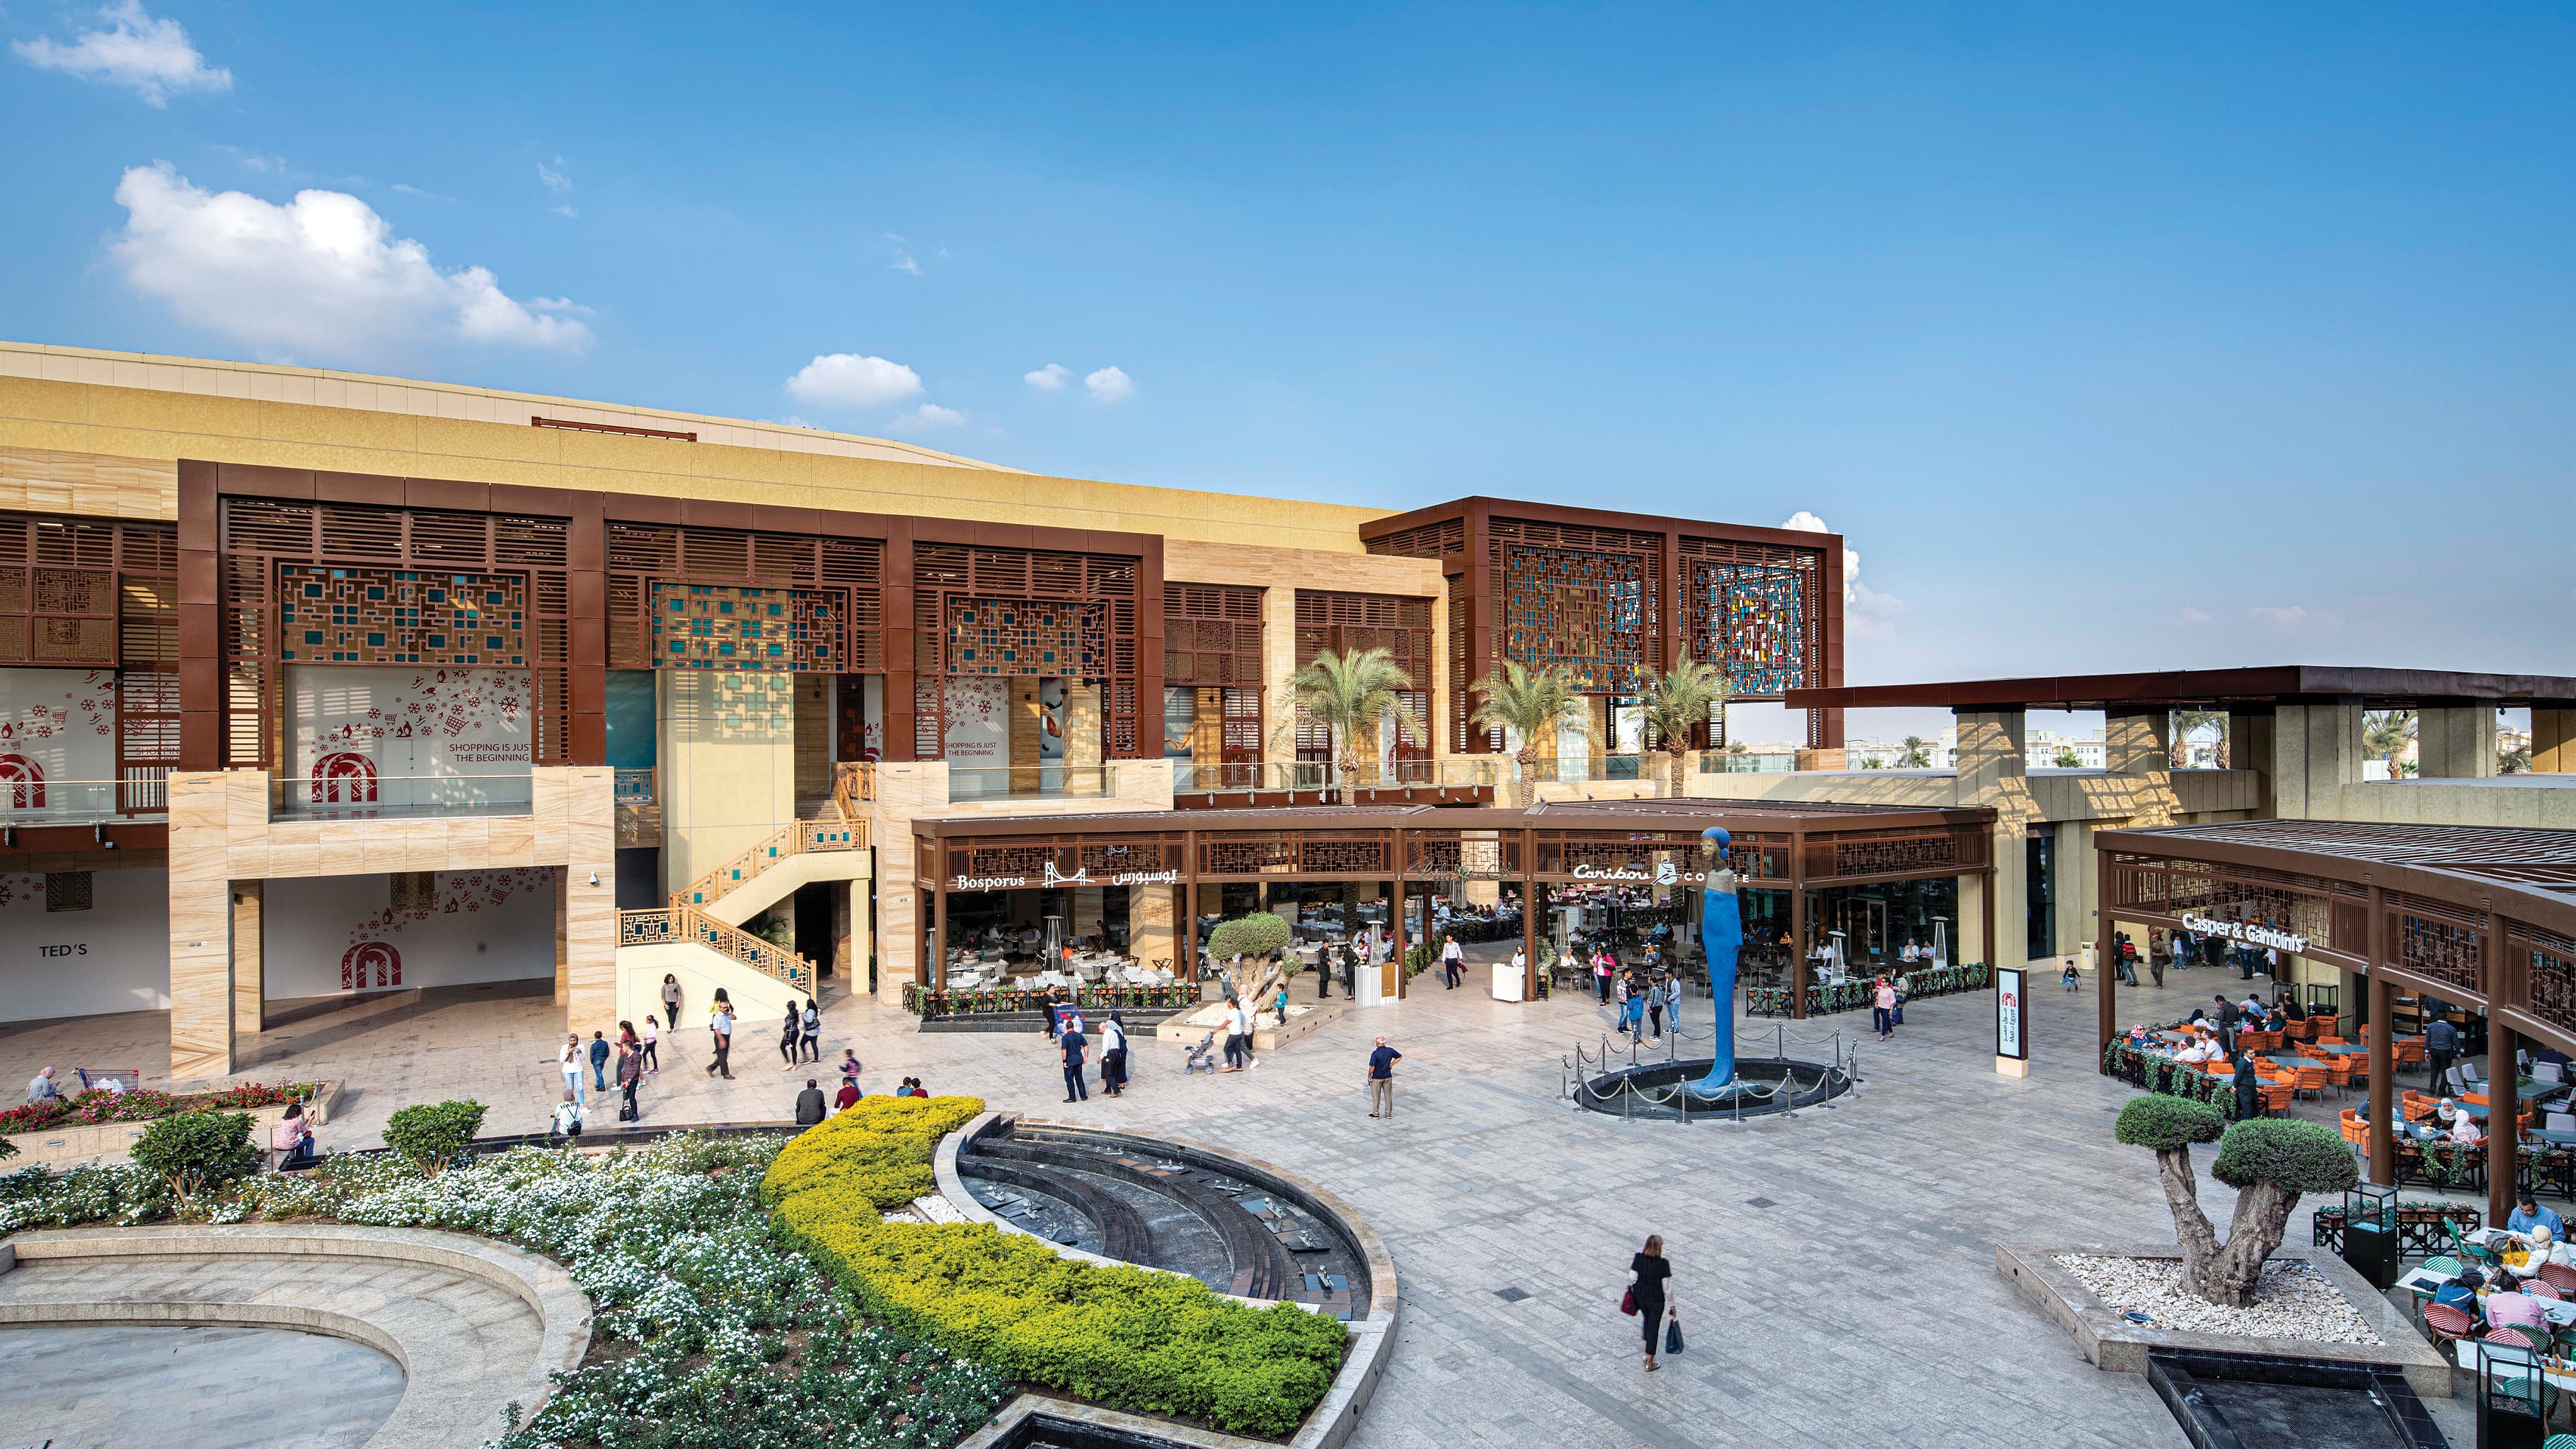 Overhead view of Mall of Egypt's outdoor retail center with monument sign